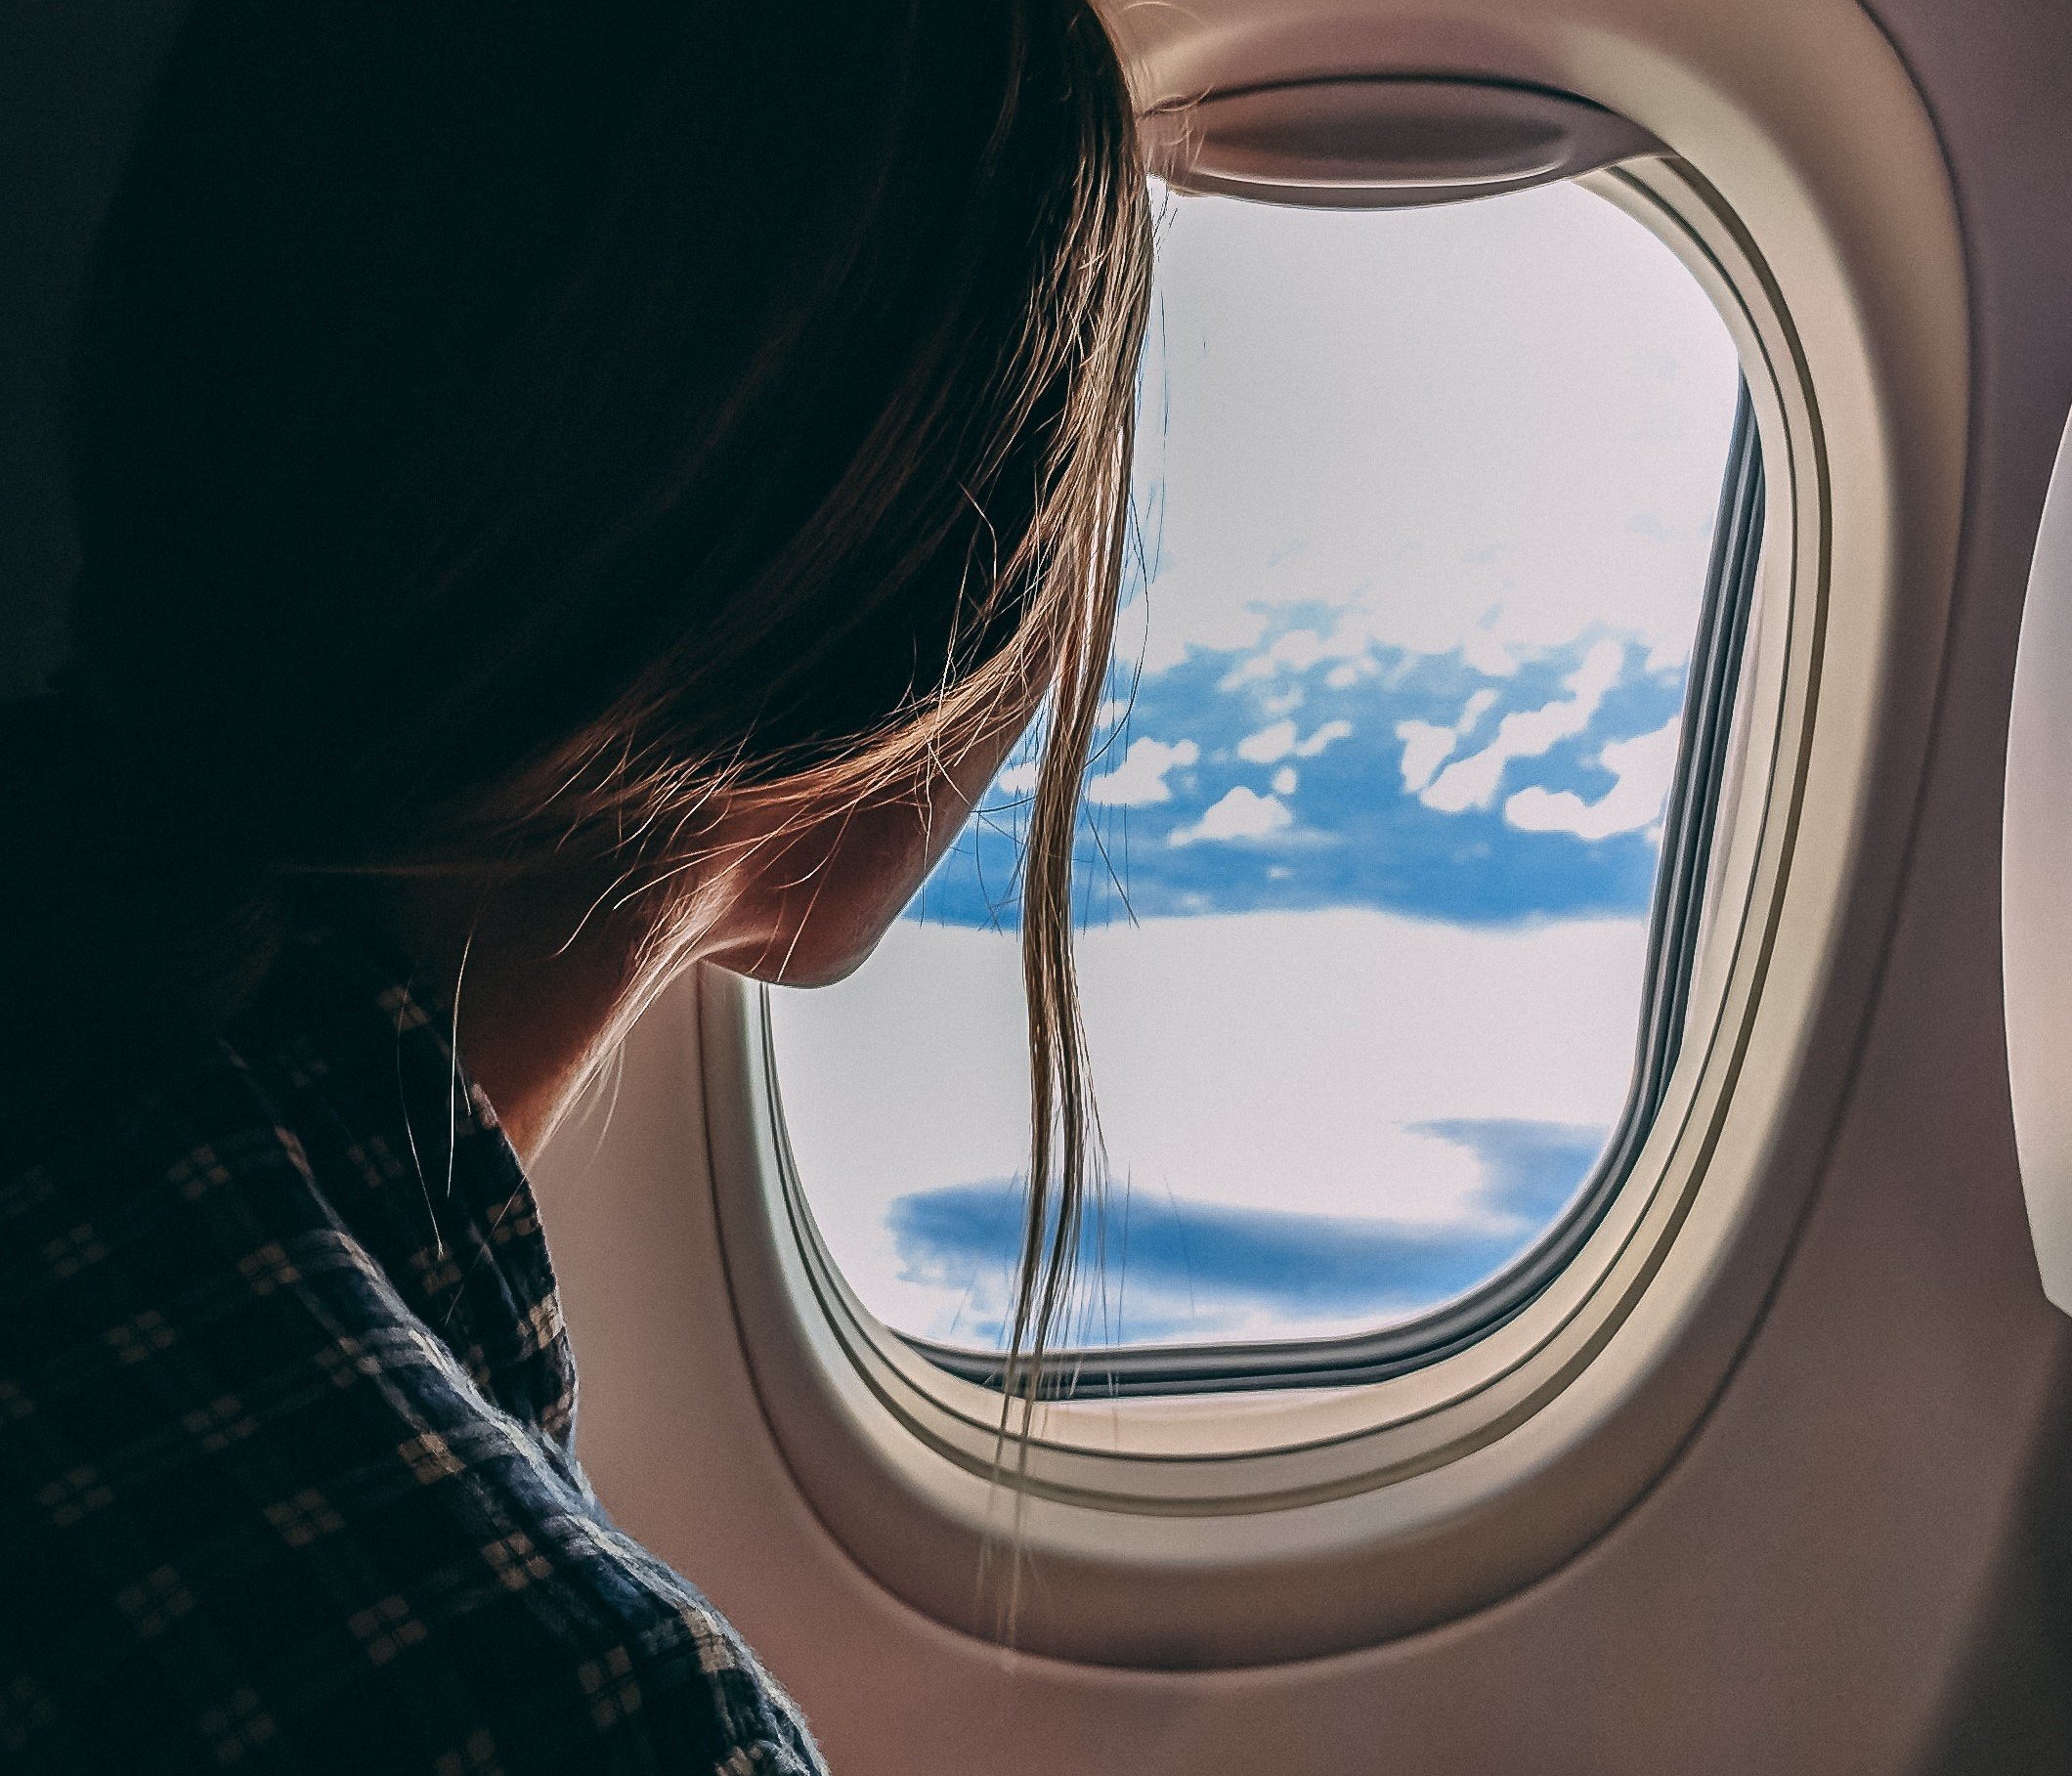 Lucy took an immediate flight to her friend Cynthia's place. | Source: Pexels